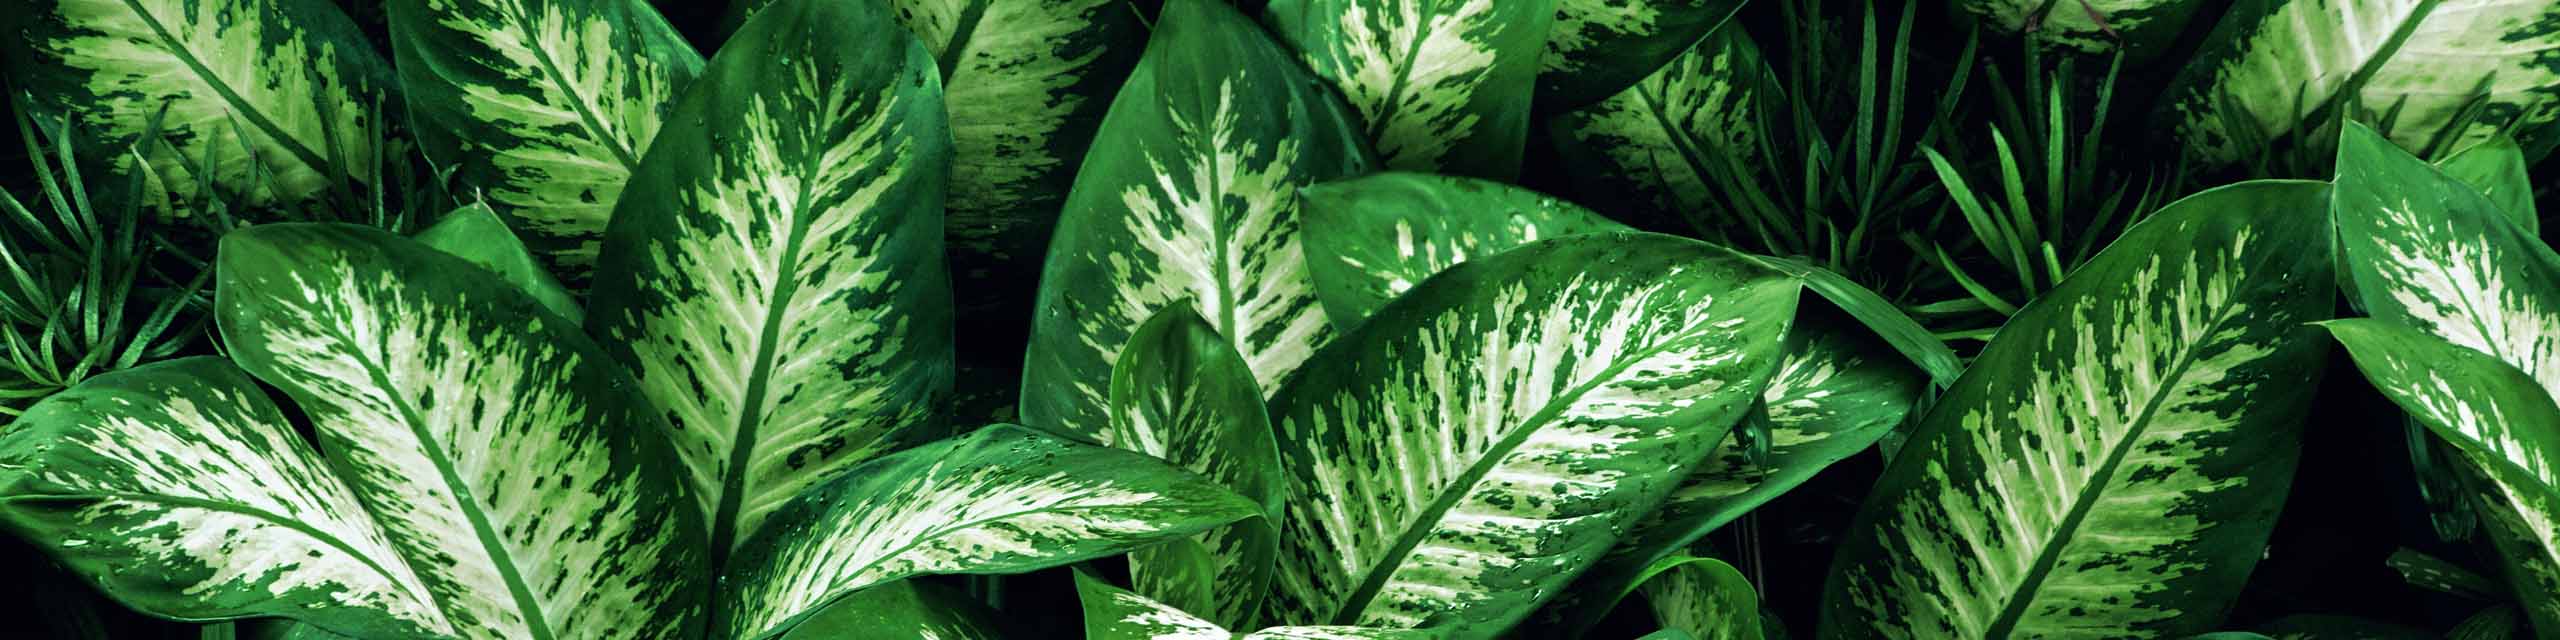 Green and white variegated leaves of a Dieffenbachia plant.